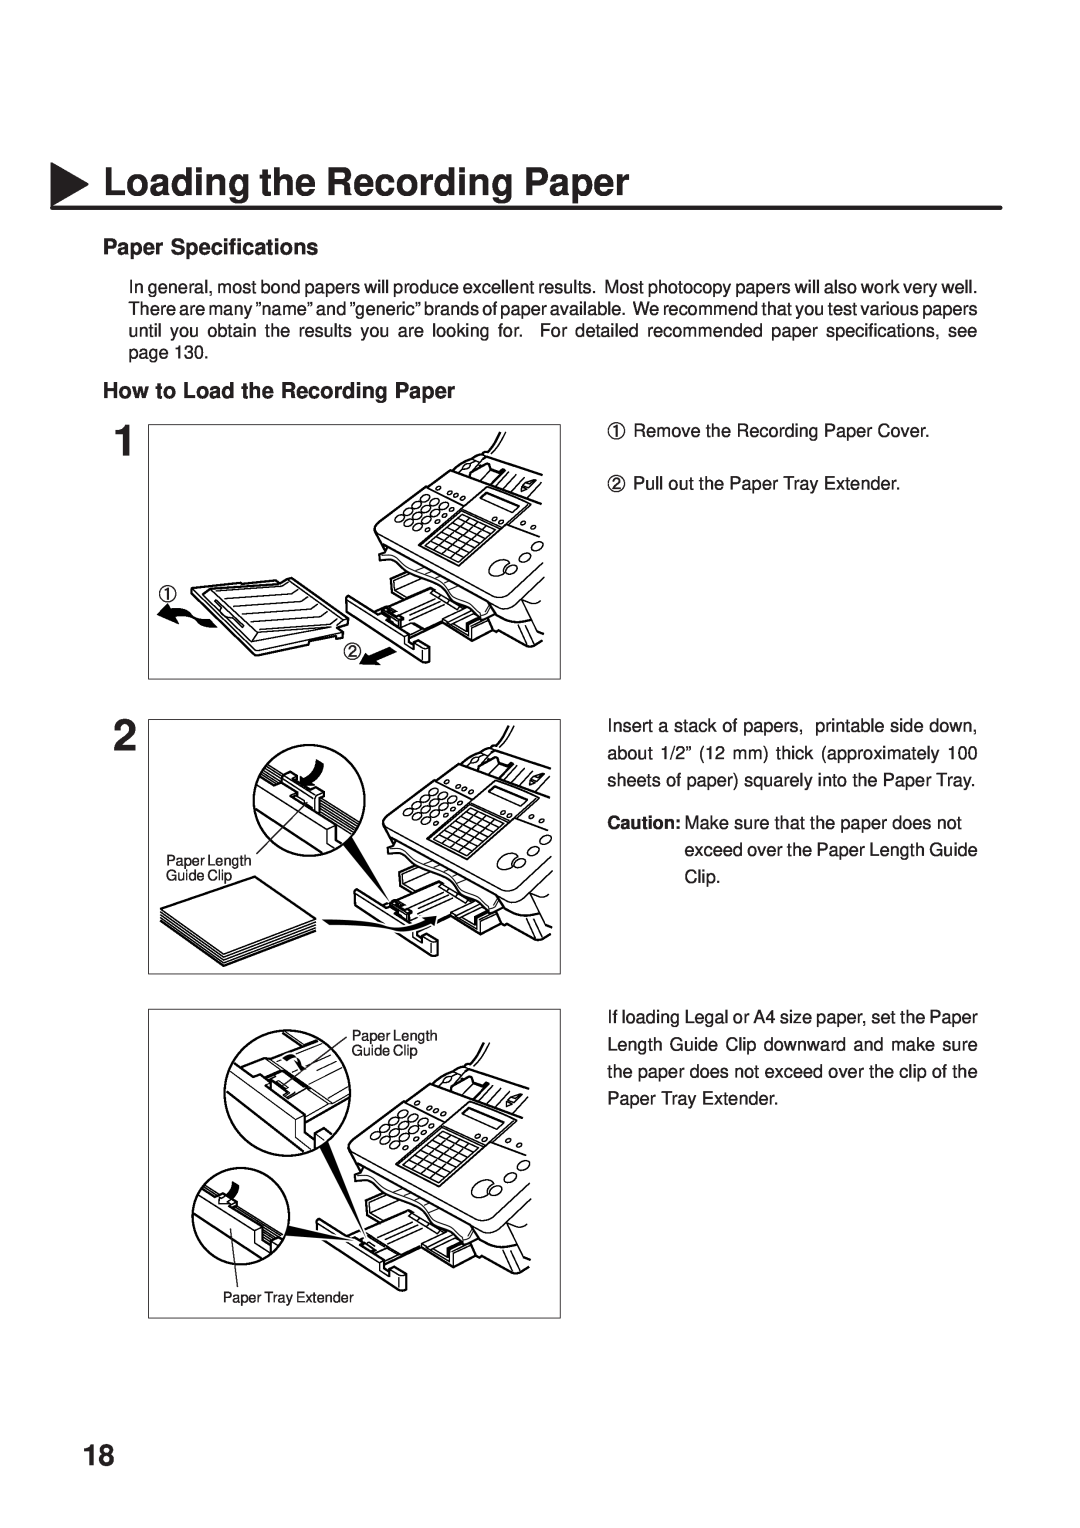 Panasonic UF-333 manual Loading the Recording Paper, Paper Specifications, How to Load the Recording Paper 